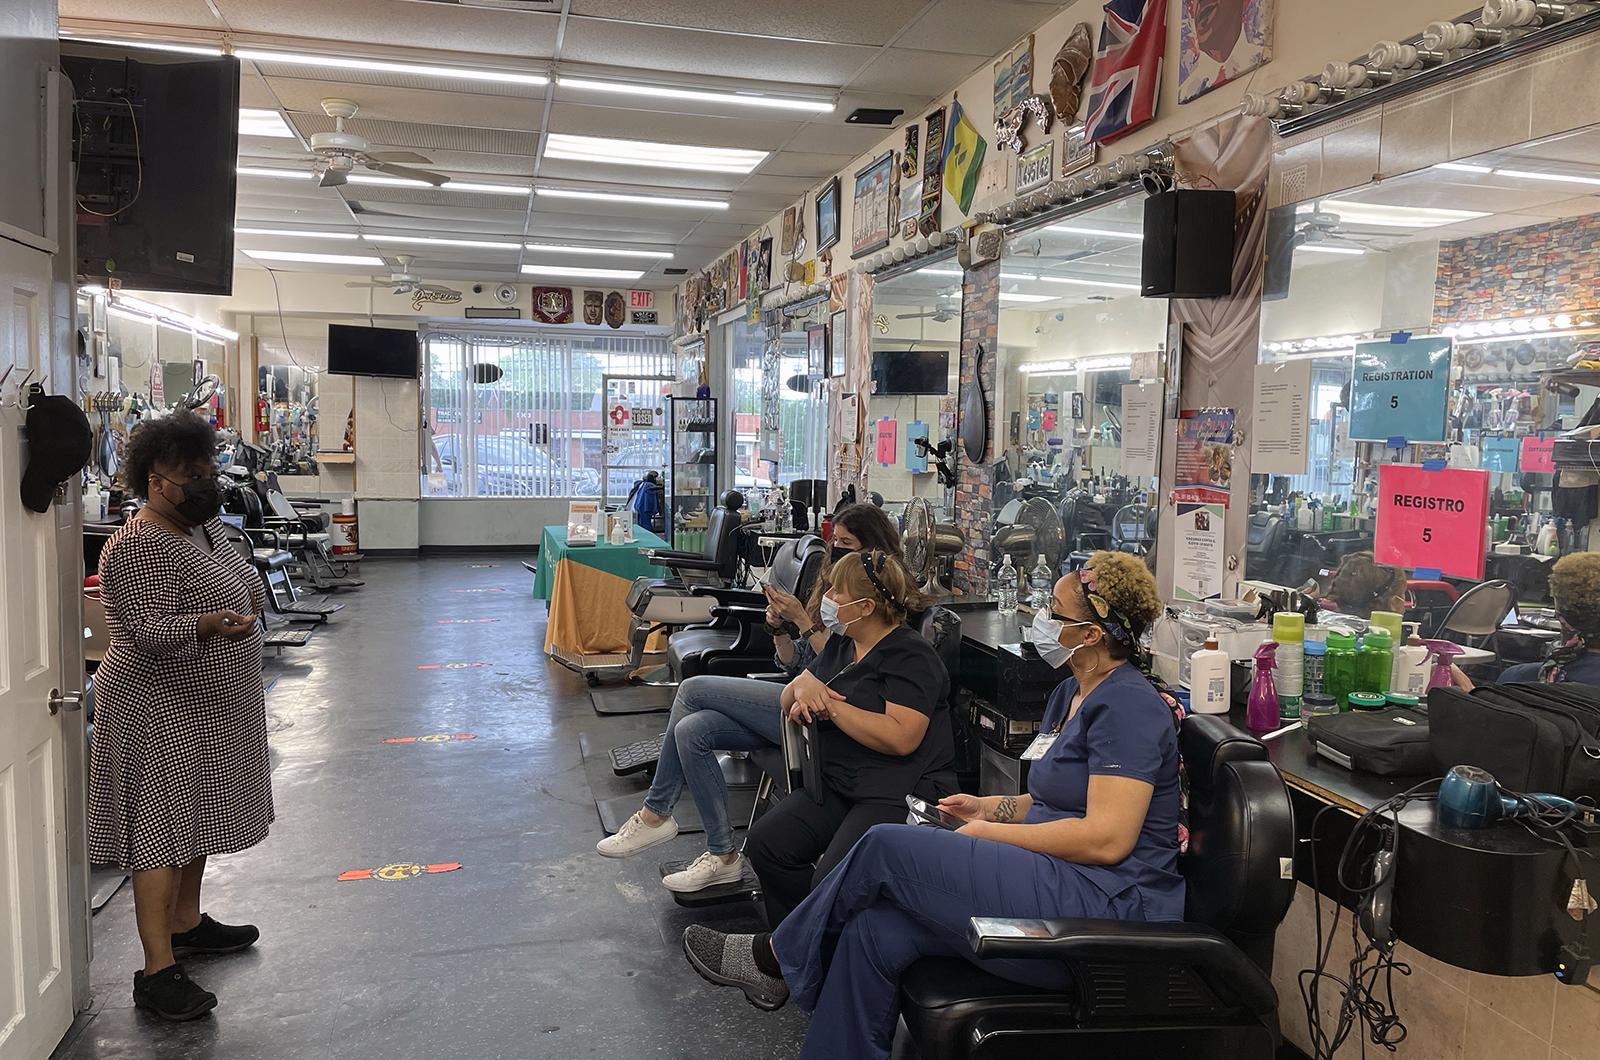 Nurses who administered vaccines at a barbershop clinic sit and talk in the barber chairs.